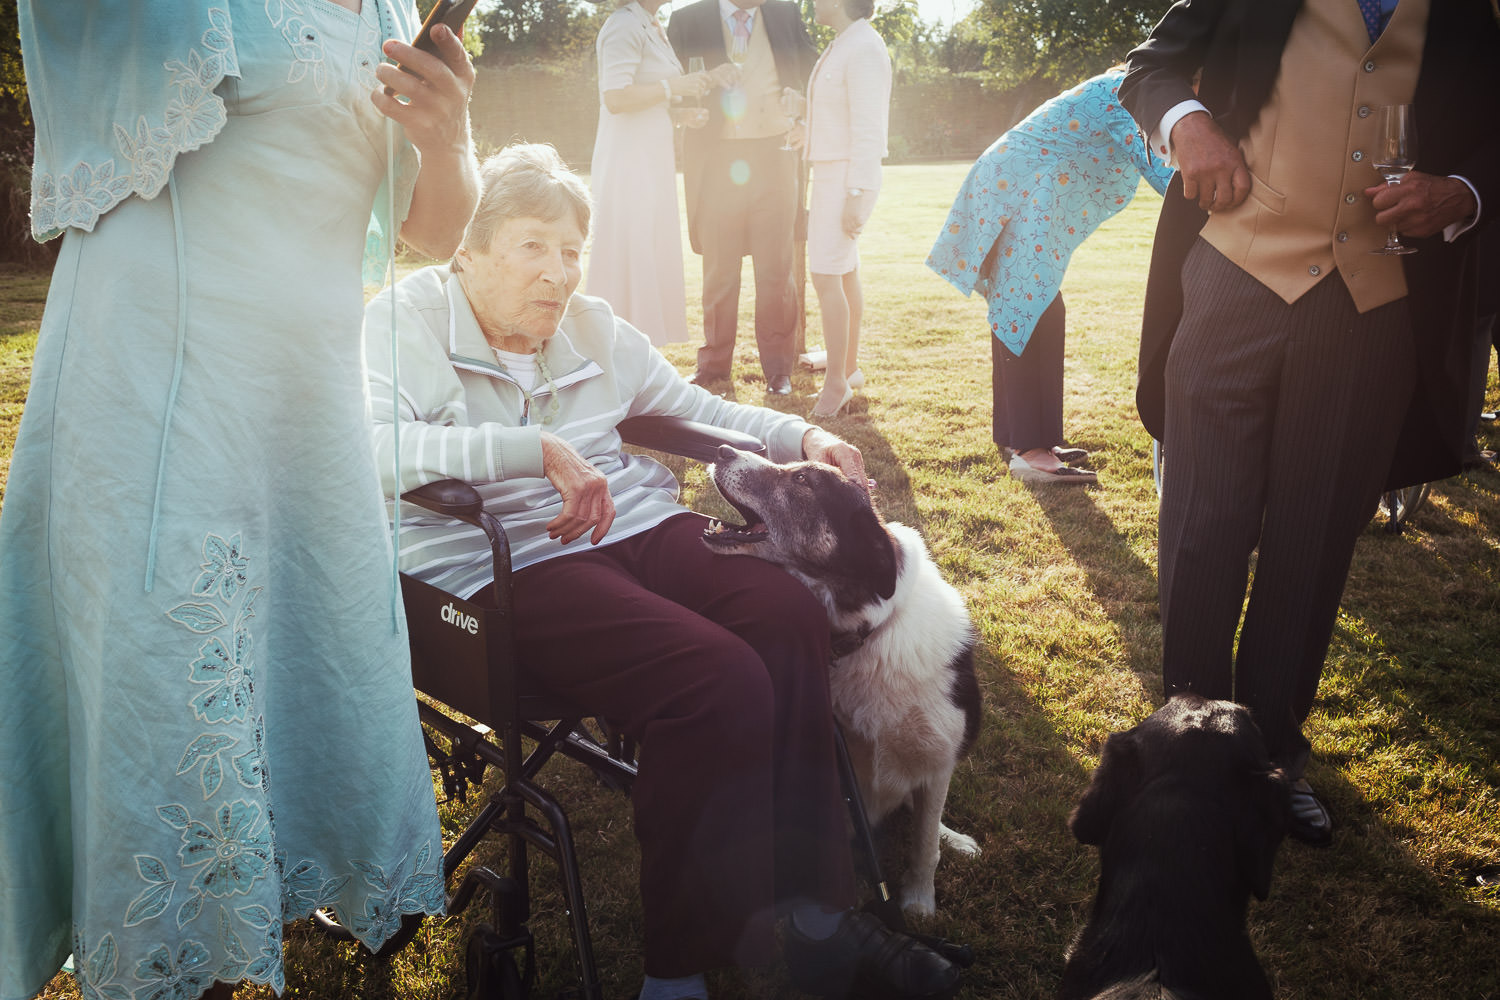 A dog rests it's head on a woman's lap, she is in a wheelchair. People stand around her in the sunshine.